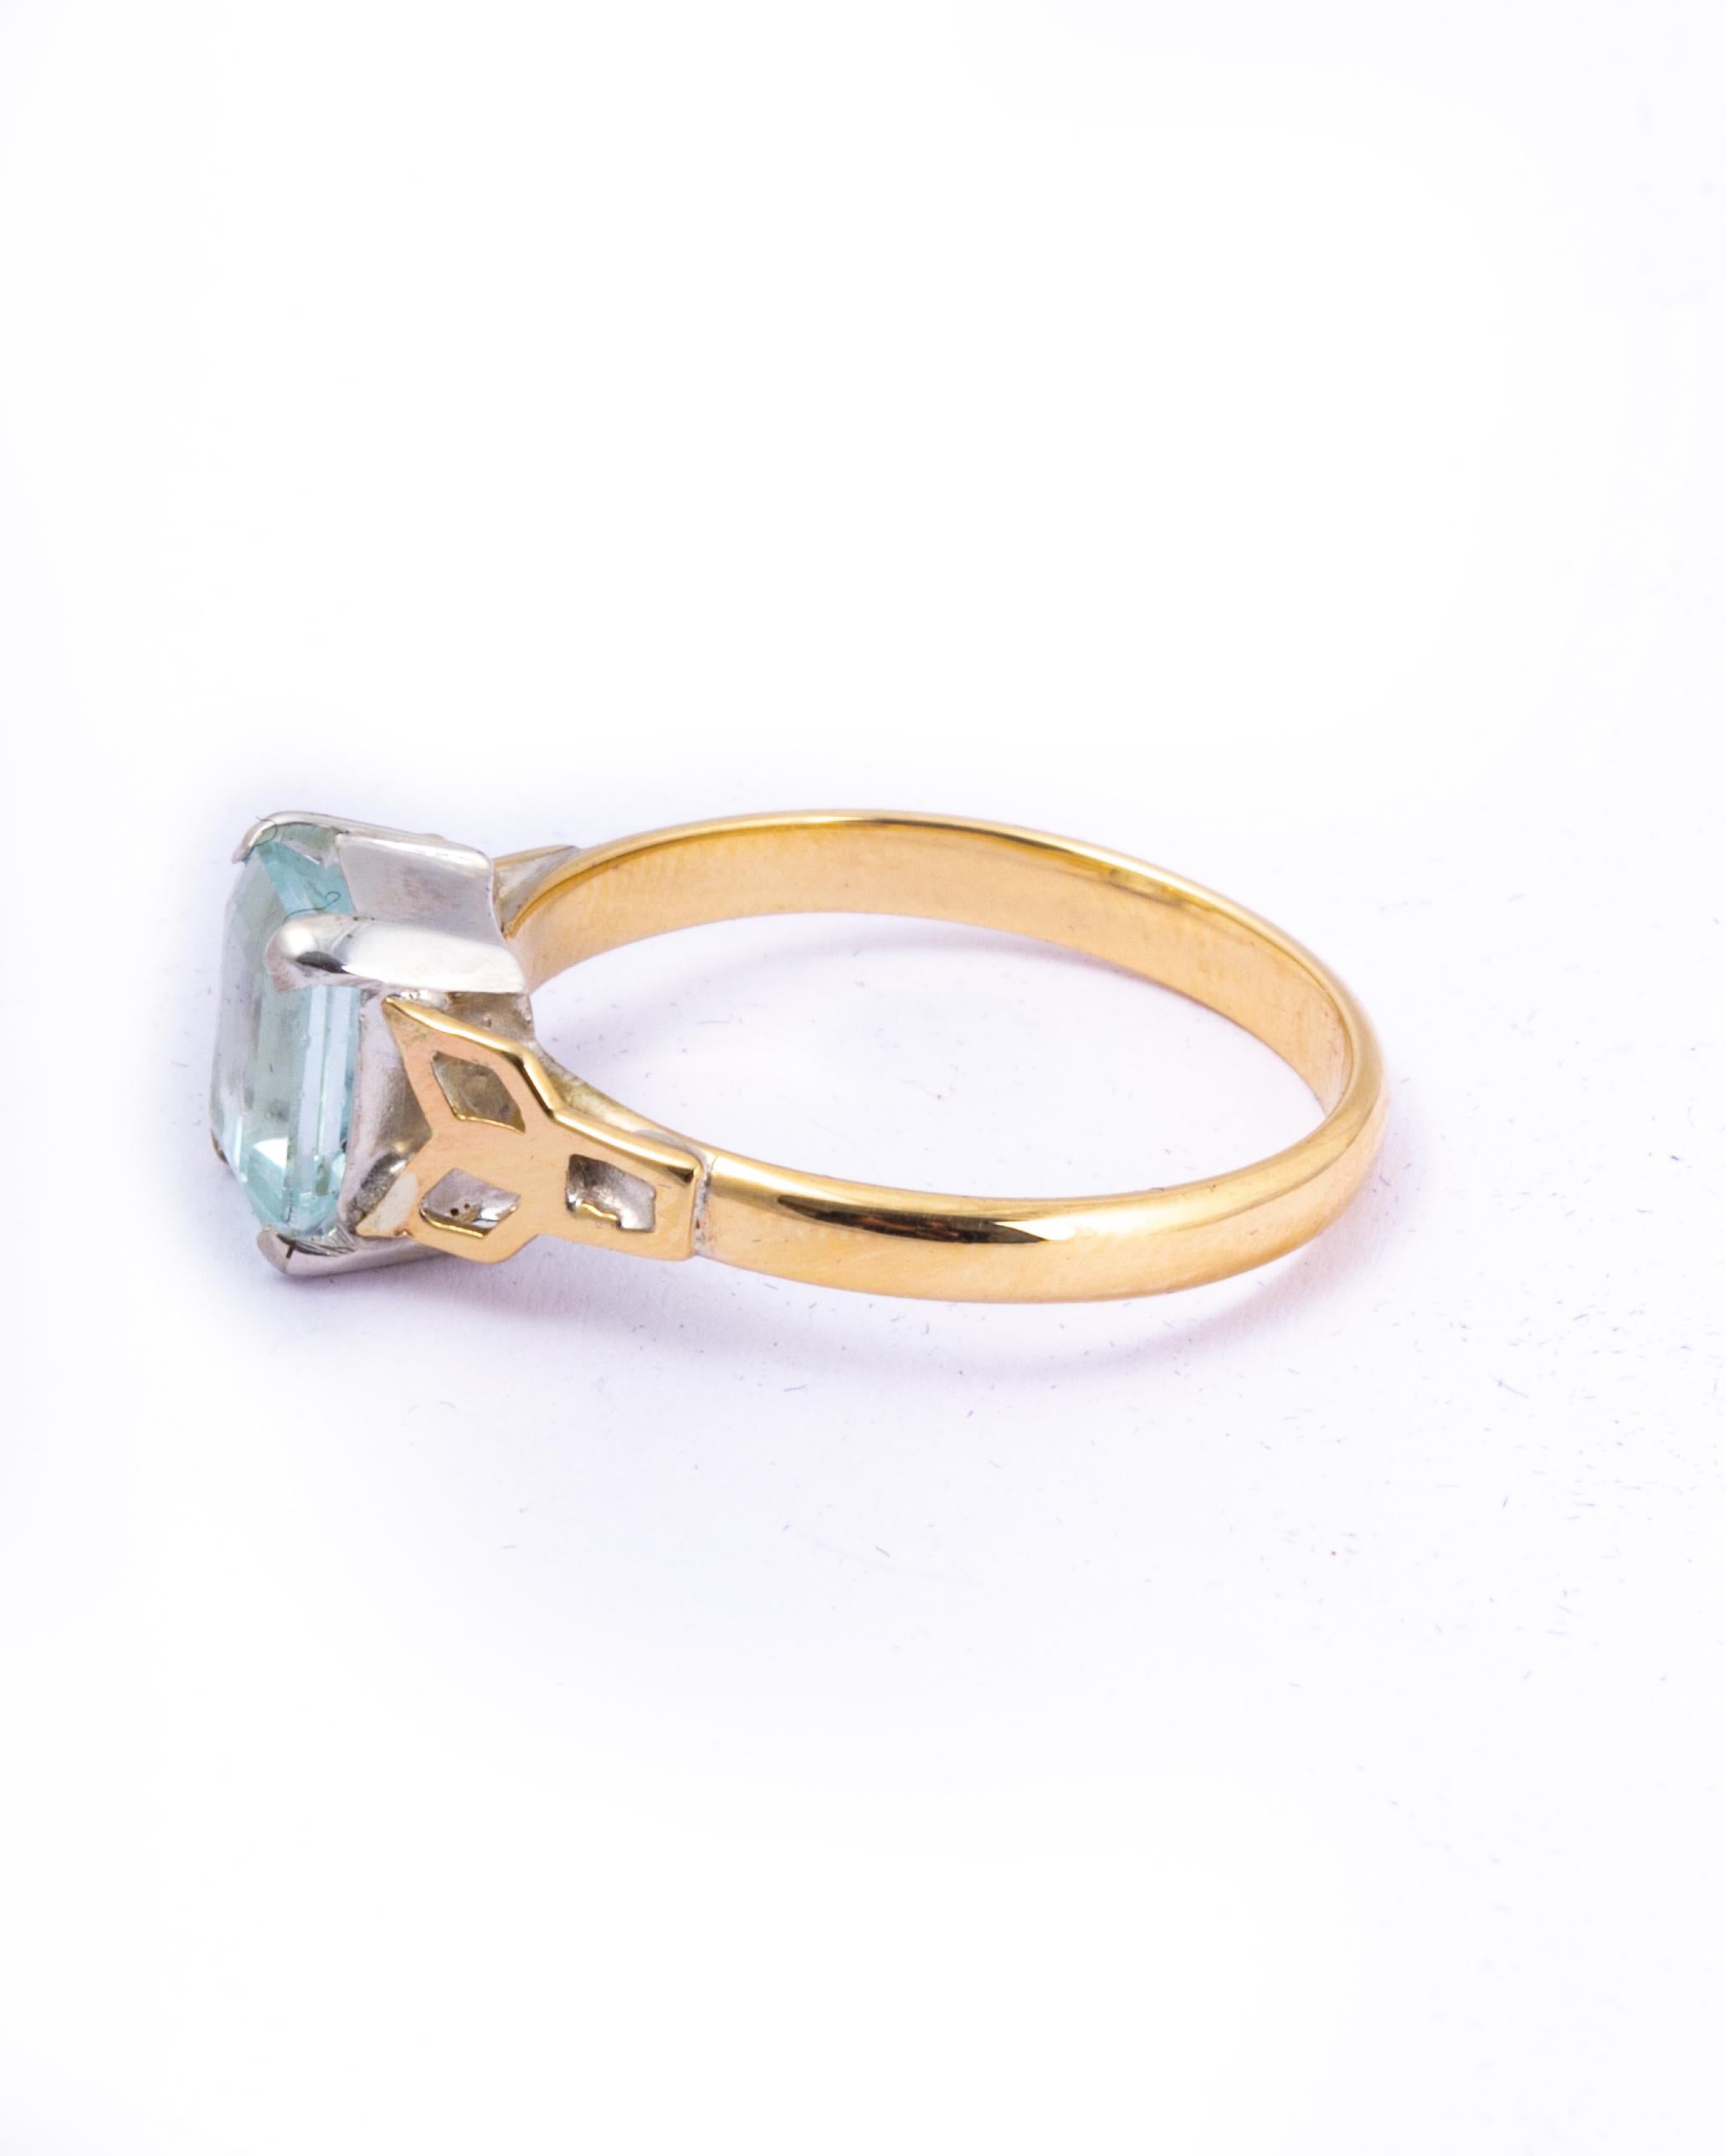 This stunning aqua is pale in colour and has a cut which gives a hall of mirrors effect. The shoulders, setting and band is modelled in 9ct gold and is very simple in design. The stone measures 0.75carat. 

Ring Size: O or 7 1/4 
Height Off Finger: